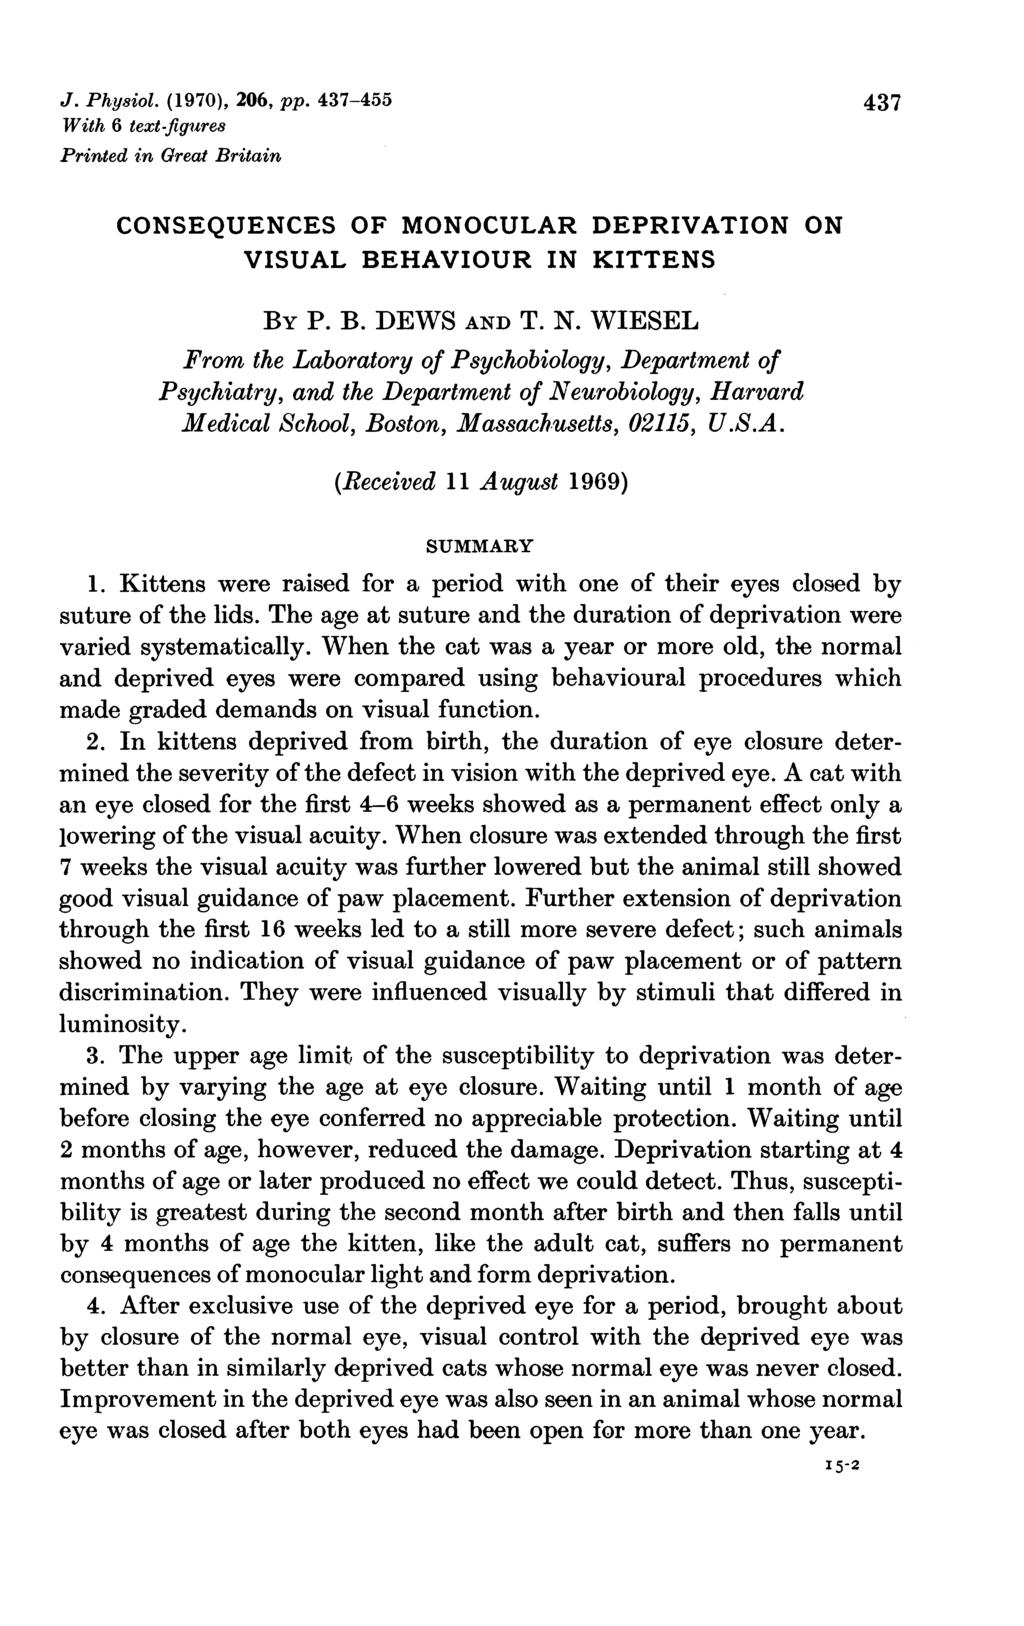 J. Physiol. (1970), 206, pp. 437-455 437 With 6 text-ftgure8 Printed in Great Britain CONSEQUENCES OF MONOCULAR DEPRIVATION ON VISUAL BEHAVIOUR IN KITTENS BY P. B. DEWS AND T. N.